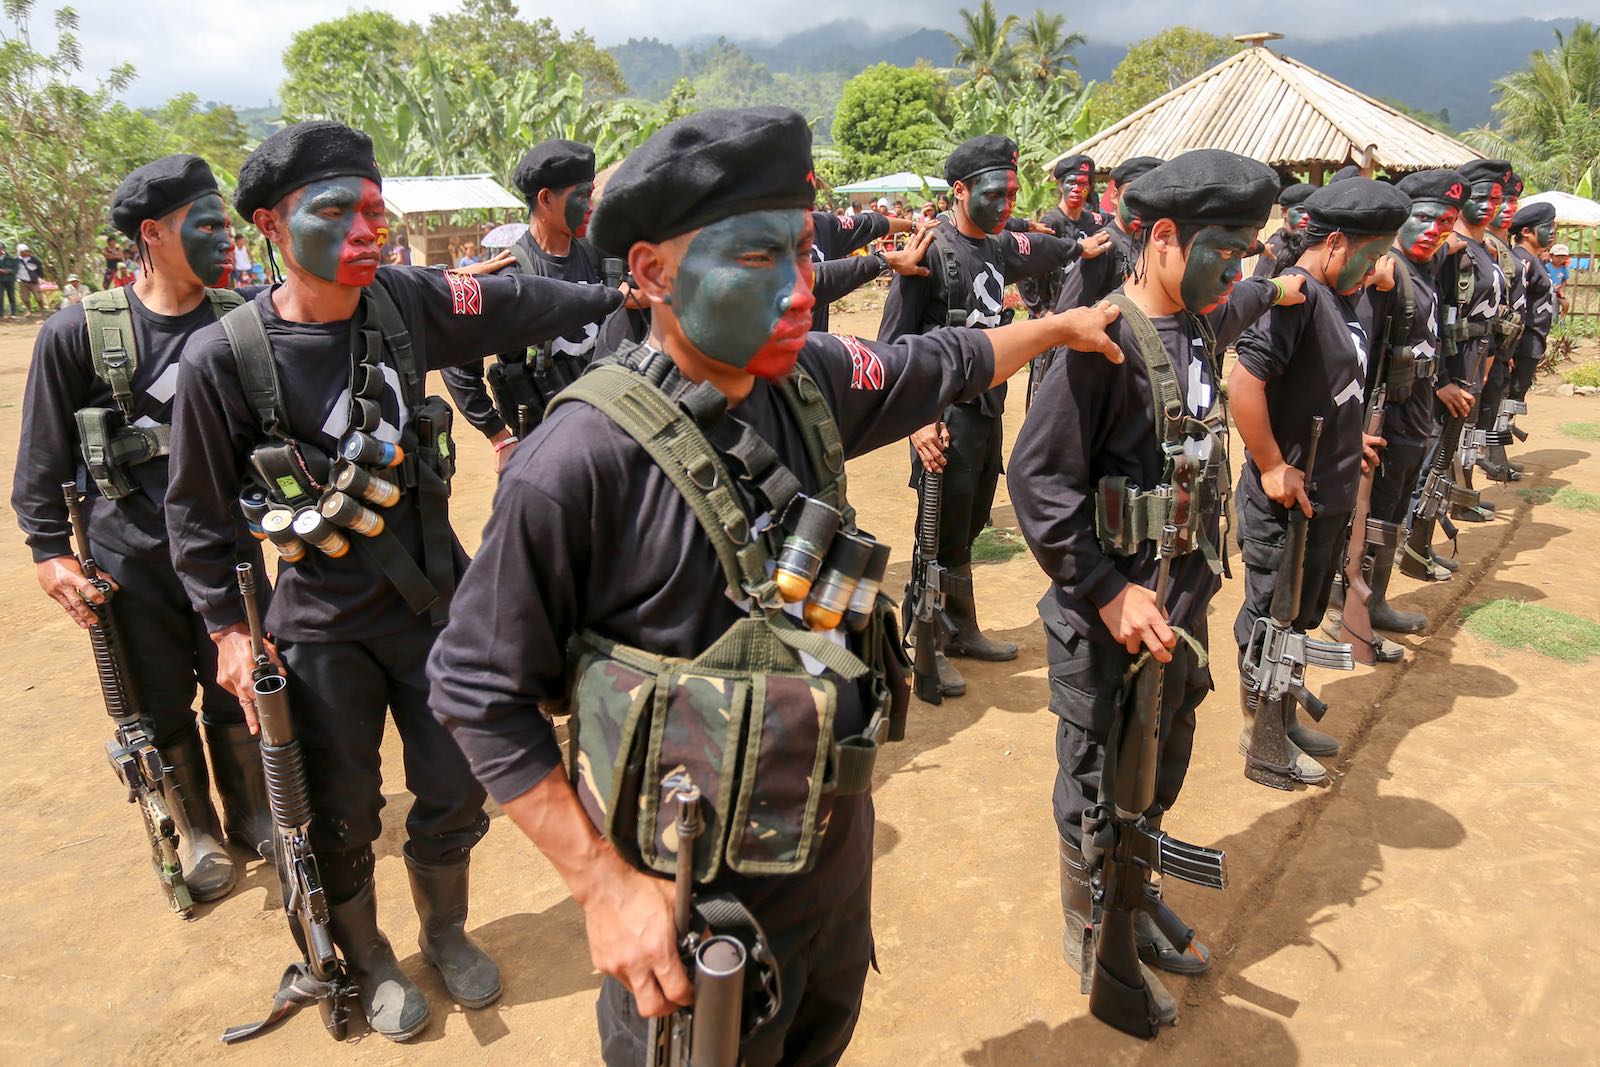 Insurgent group the New Peopleâ€™s Army has sought to foment a communist revolution in the rural regions of the Philippines (Photo: Manman Dejeto via Getty)